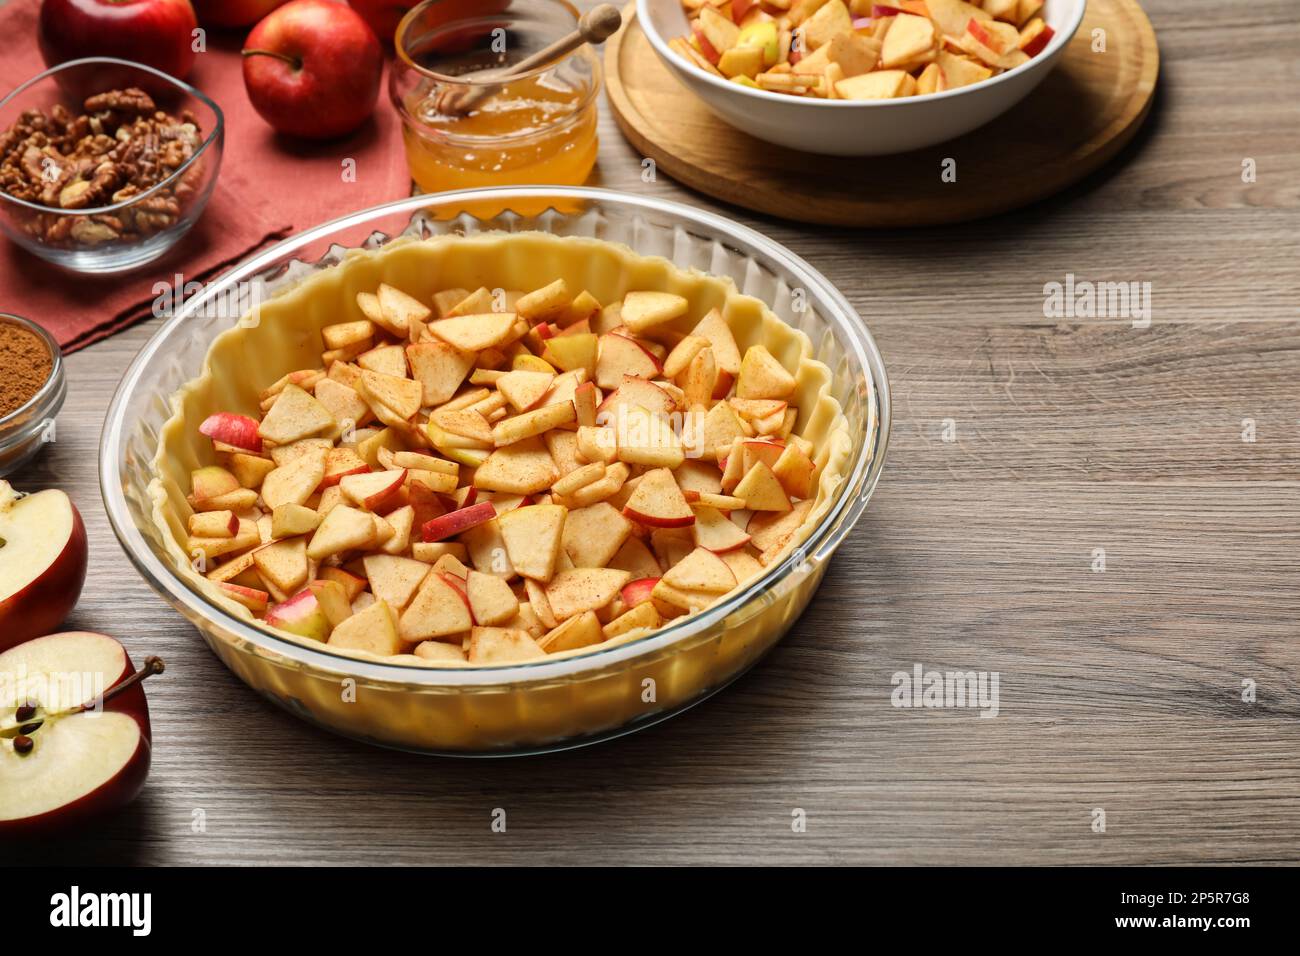 Raw dough and ingredients for apple pie on wooden table Stock Photo